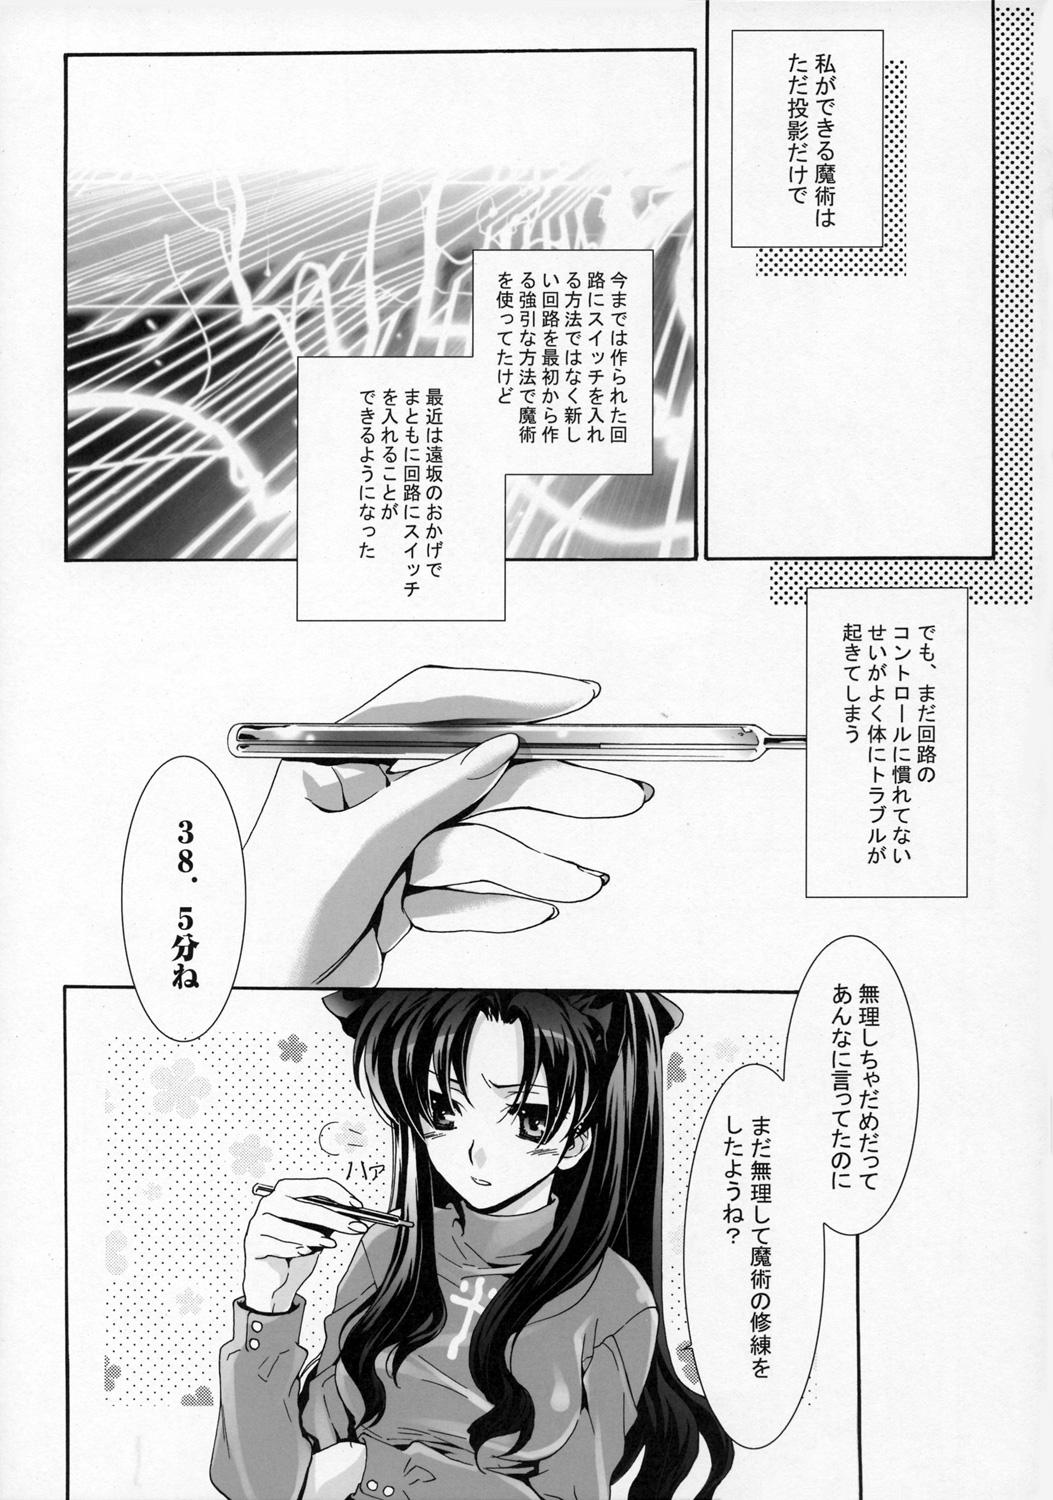 Young Tits Mittsubotan de kyun! - Fate stay night Toheart2 Public Sex - Page 6